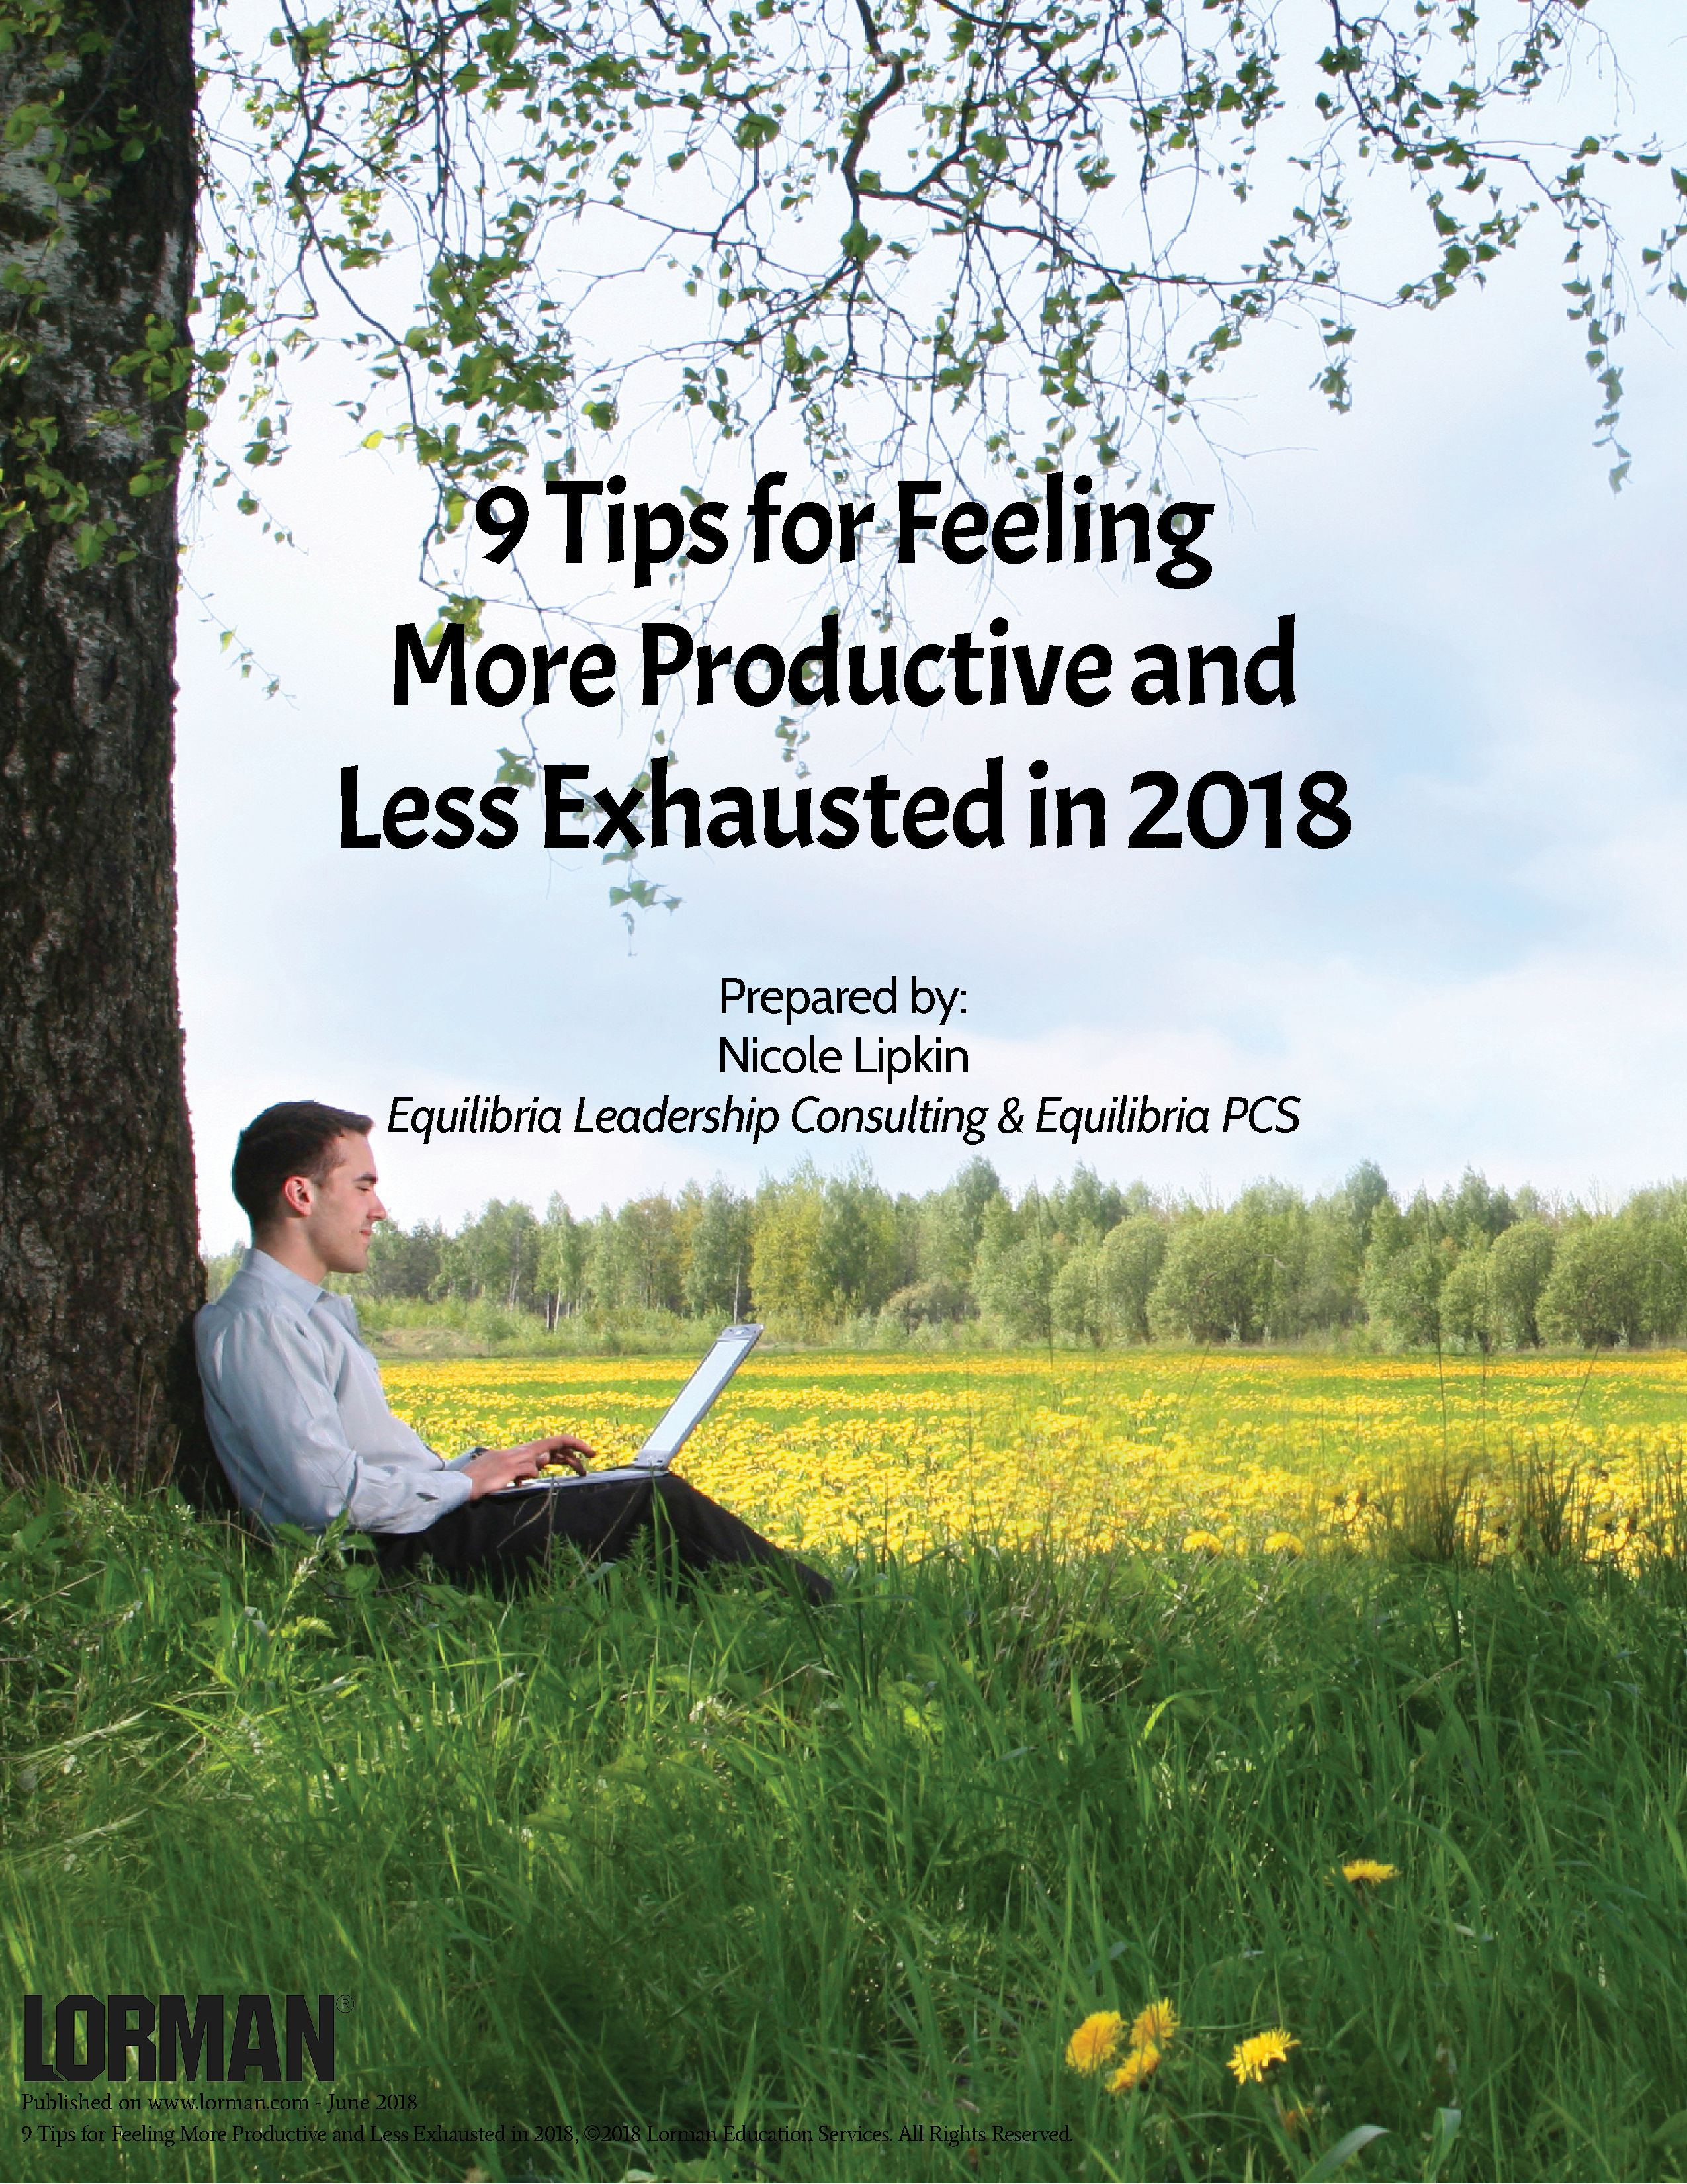 9 Tips for Feeling More Productive and Less Exhausted in 2018